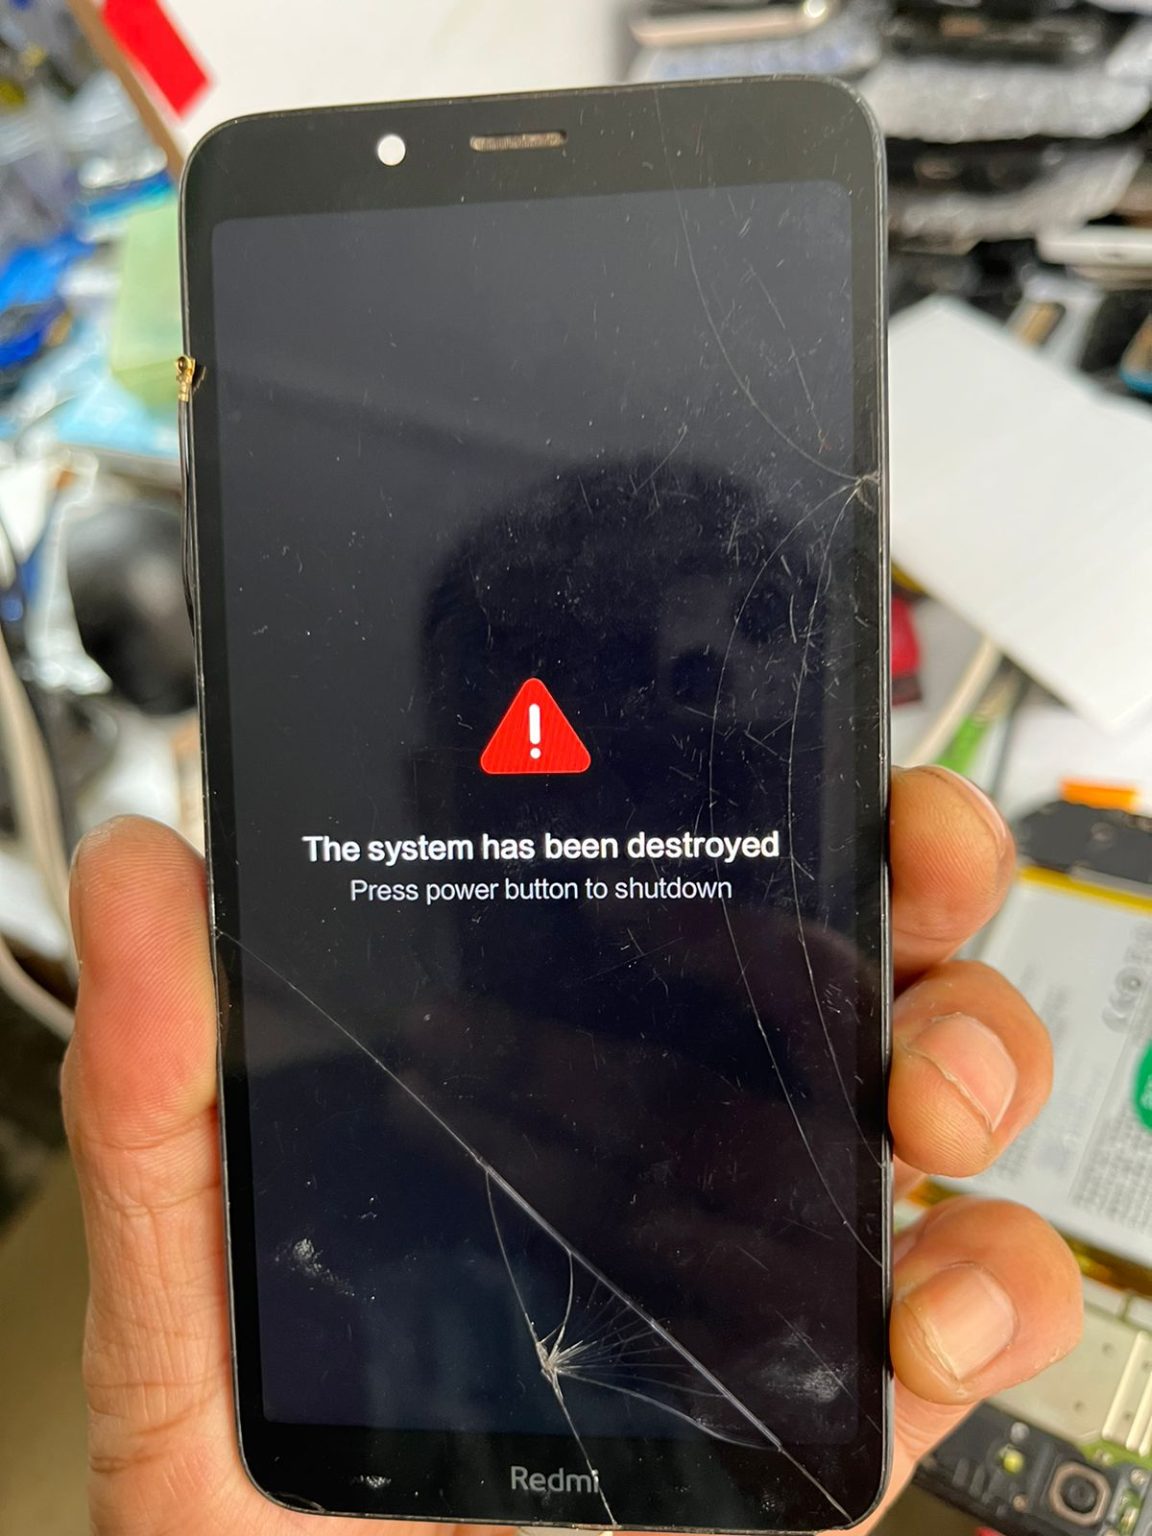 The system has been destroyed xiaomi redmi. Redmi the System has been destroyed. The System has been destroyed Xiaomi. Xiaomi Error. The System has been destroyed Apple.